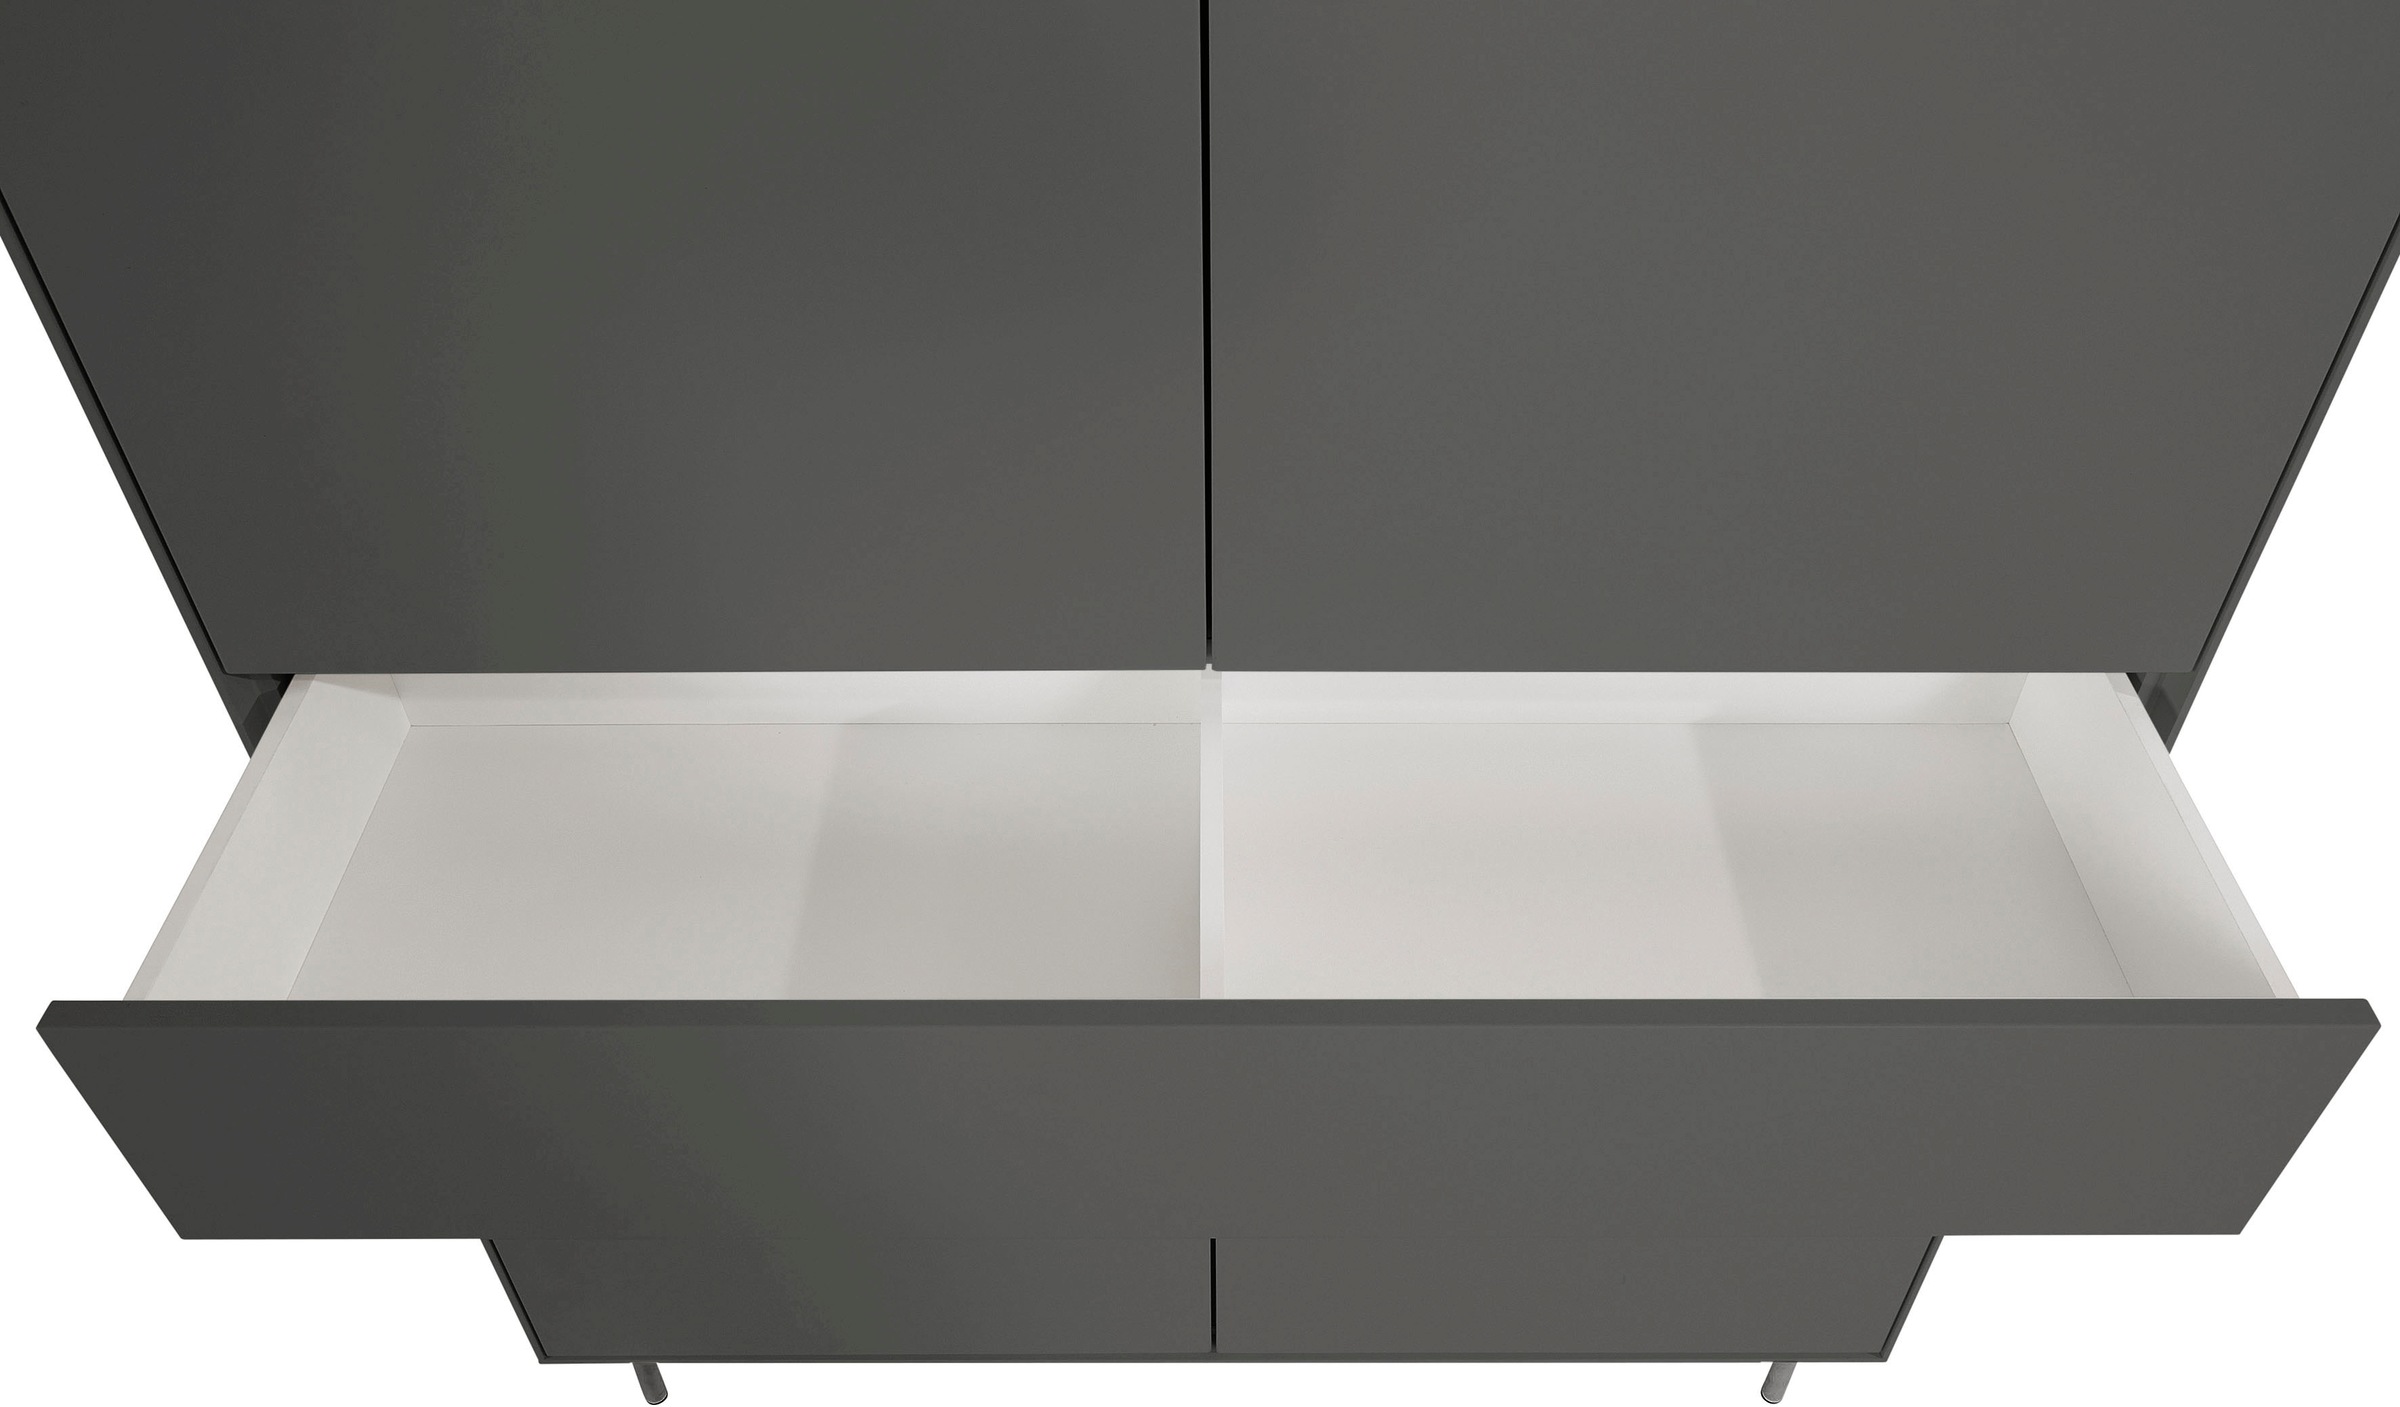 LeGer Home by Lena Gercke Highboard »Essentials«, Höhe: 144cm, MDF lackiert, Push-to-open-Funktion